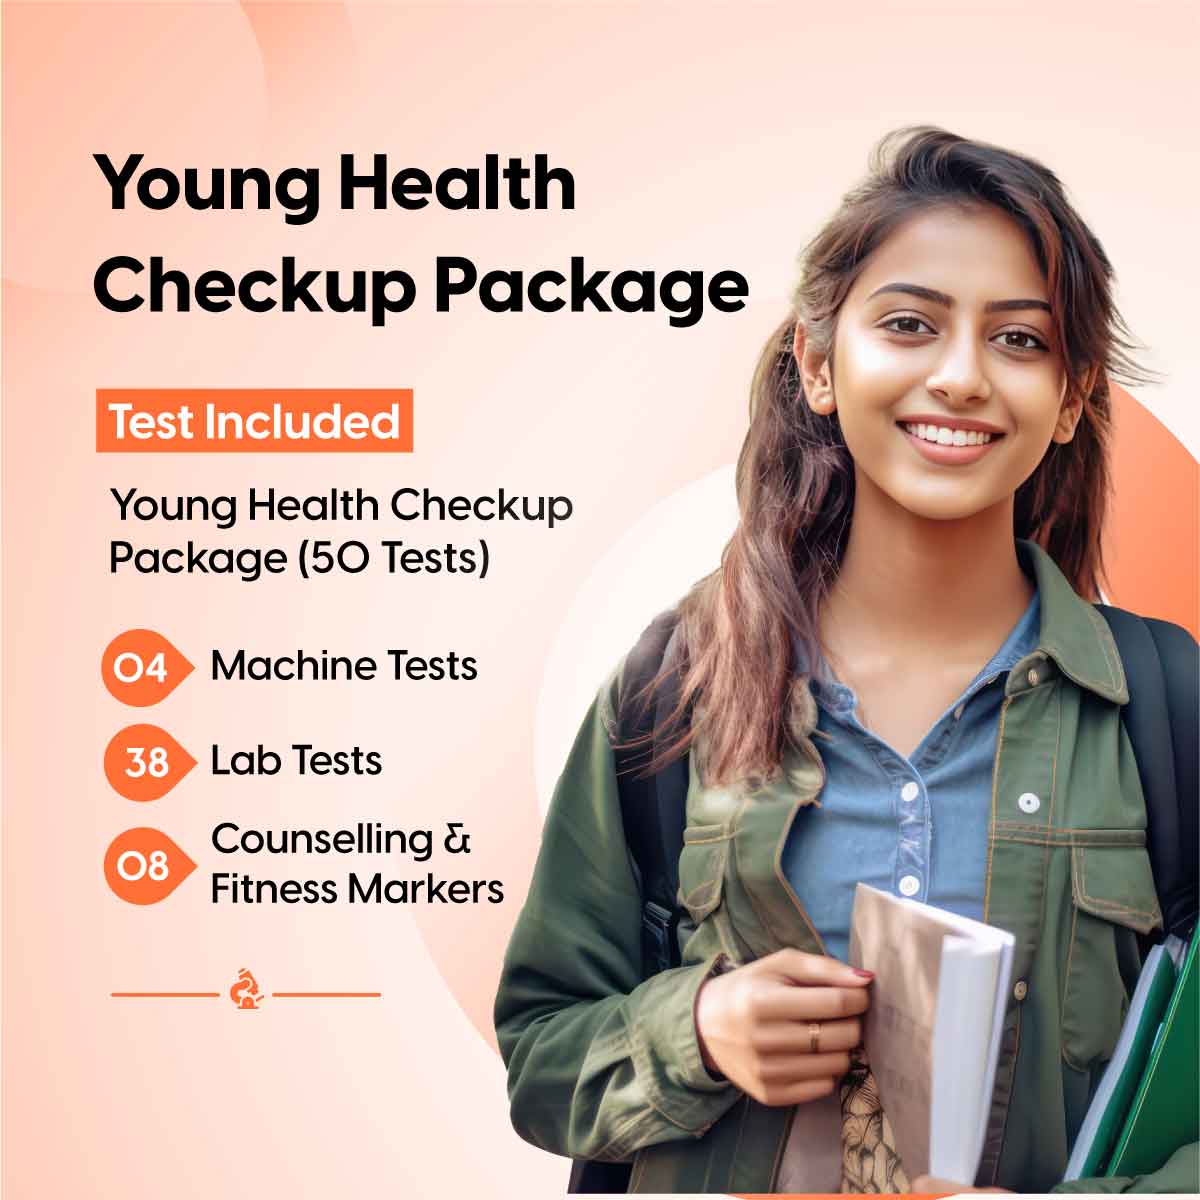 Young Health Checkup Package